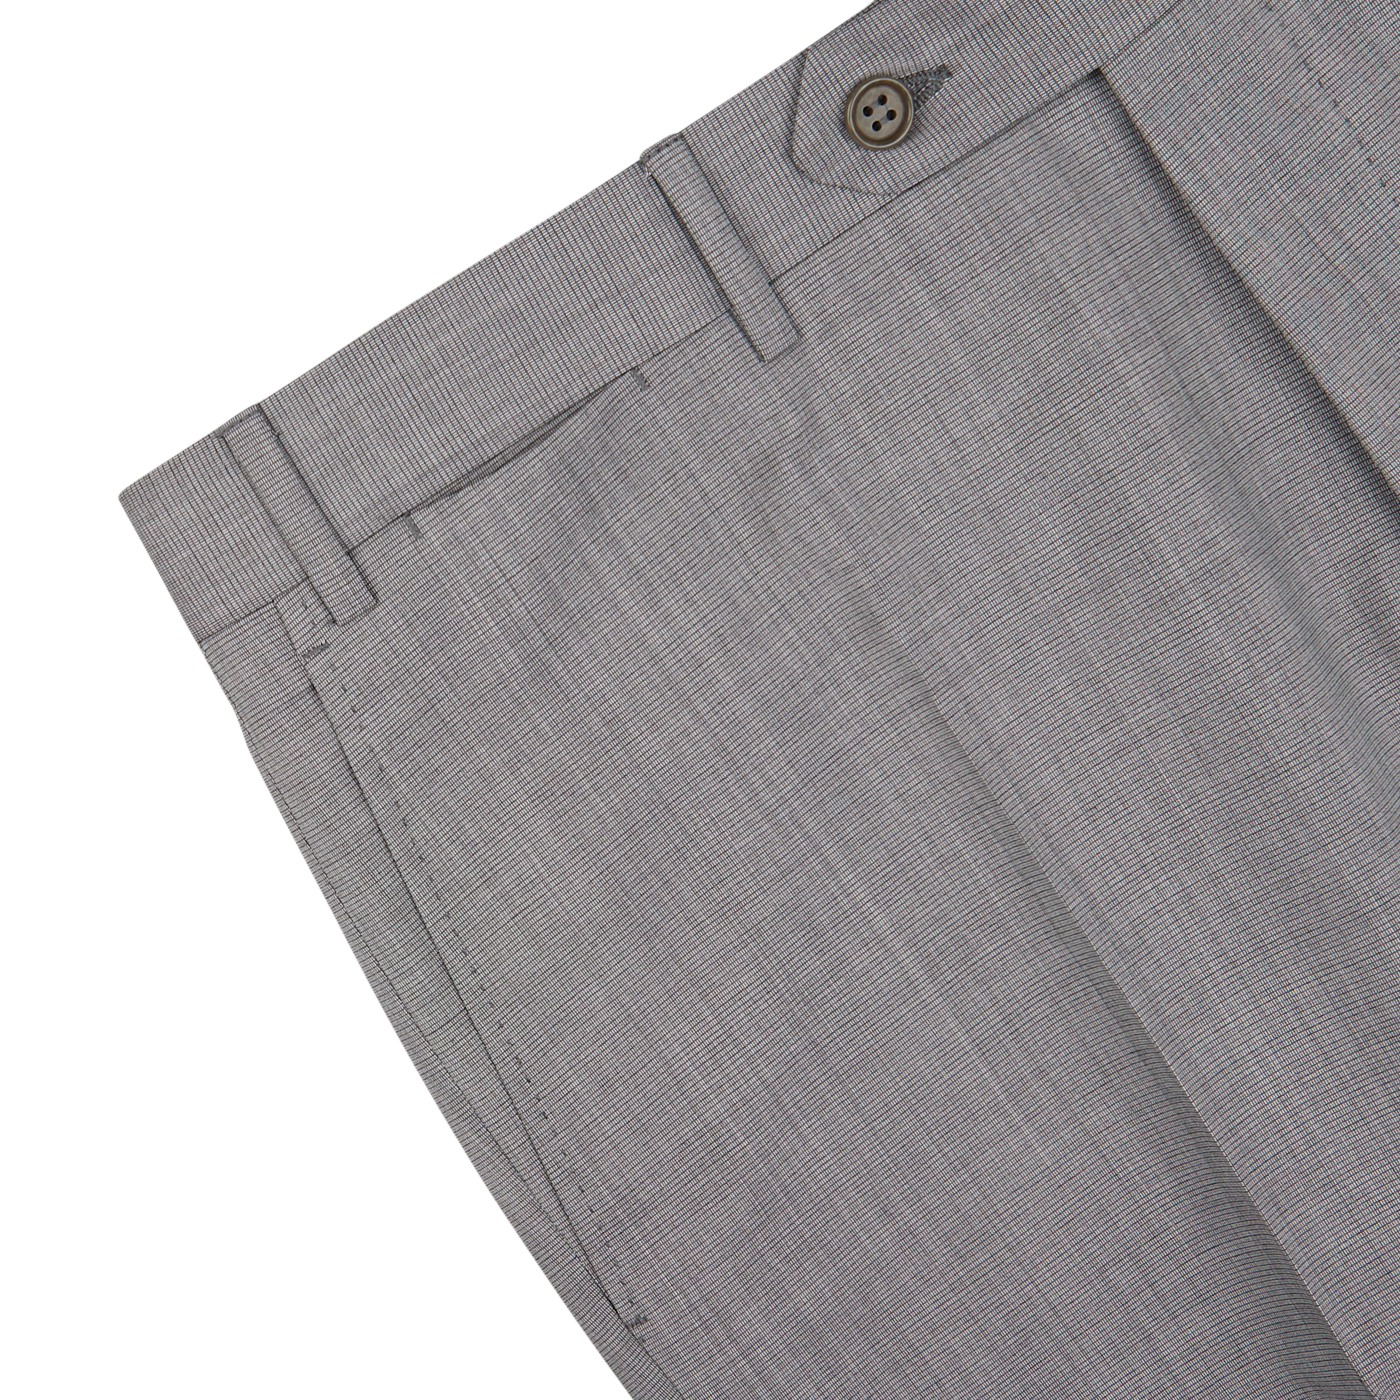 Classic Light Grey Micro Check Wool Suit pants with pleats on a white background. (Canali)